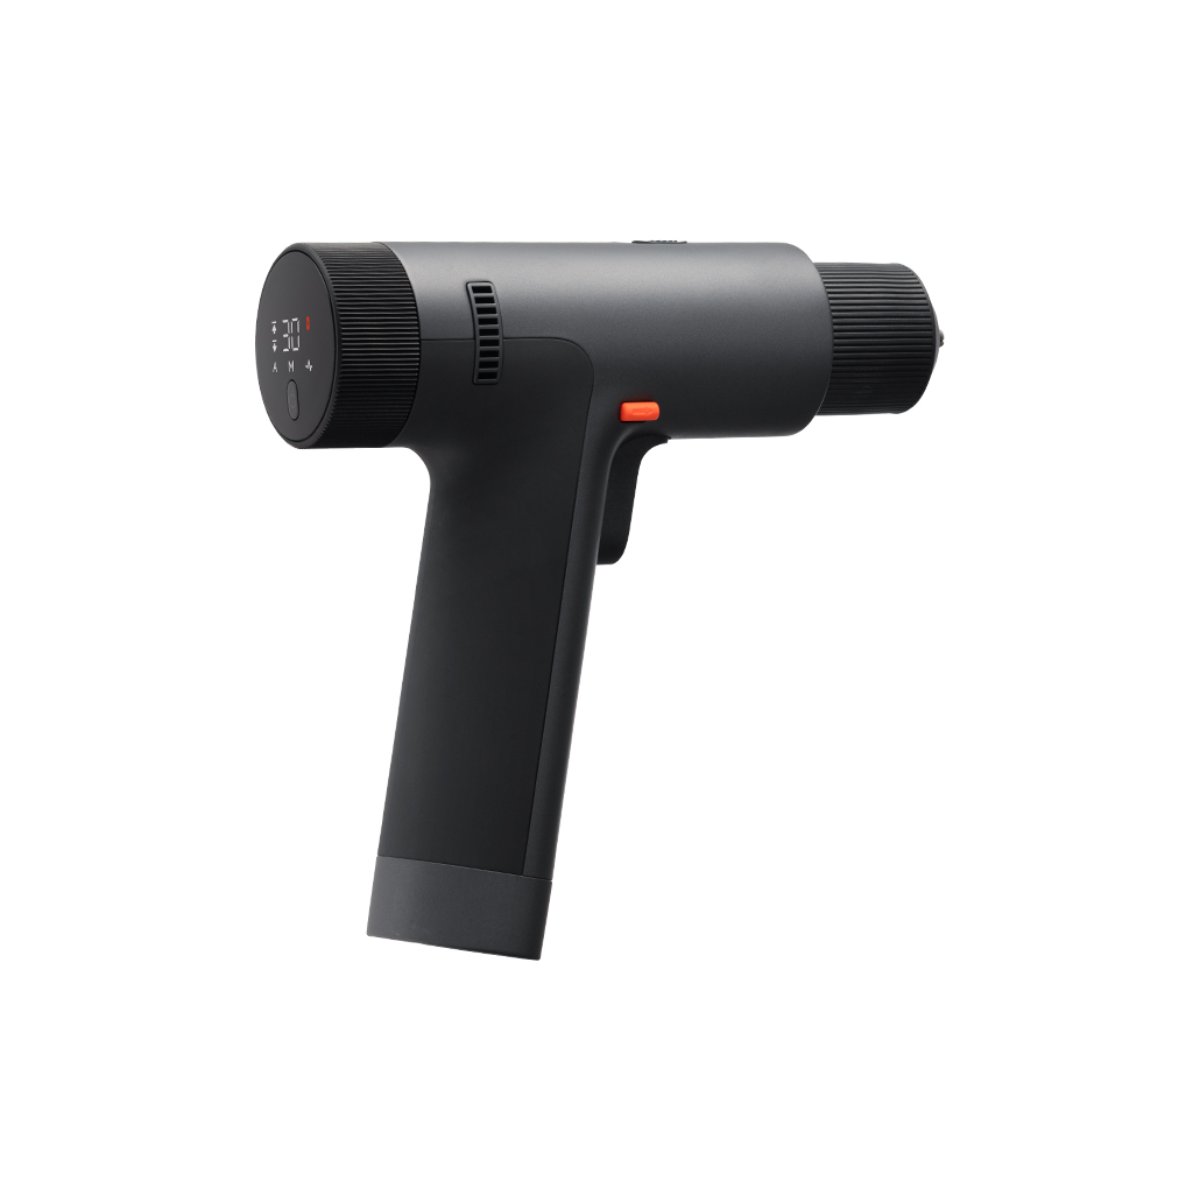 Xiaomi 12V Max Brushless Cordless Drill, , large image number 3